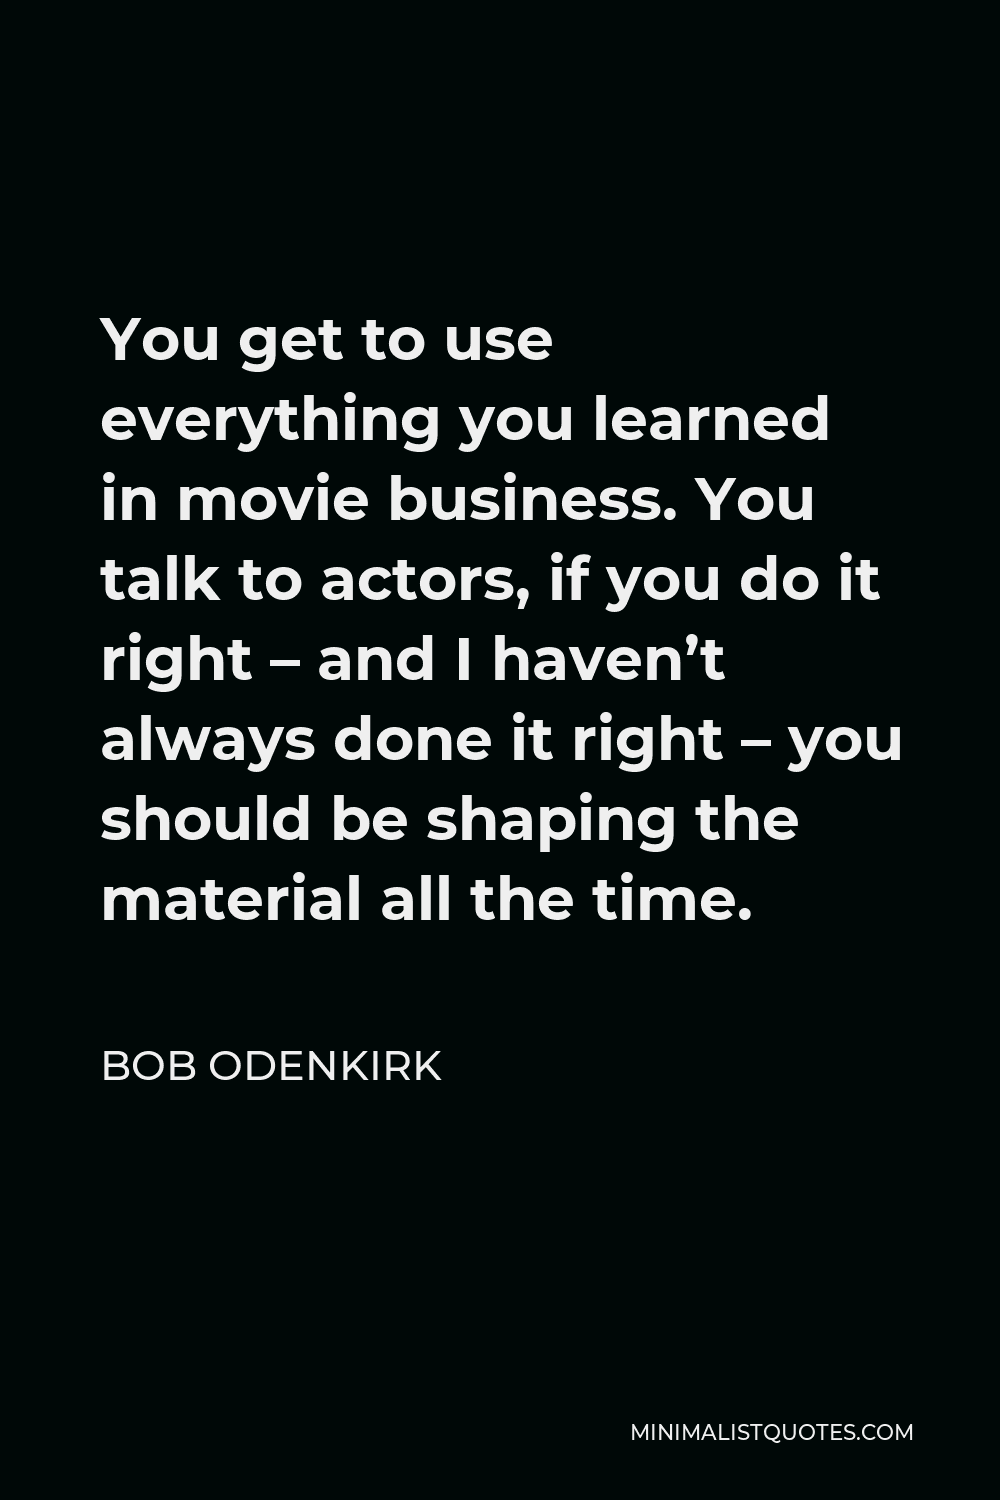 Bob Odenkirk Quote - You get to use everything you learned in movie business. You talk to actors, if you do it right – and I haven’t always done it right – you should be shaping the material all the time.